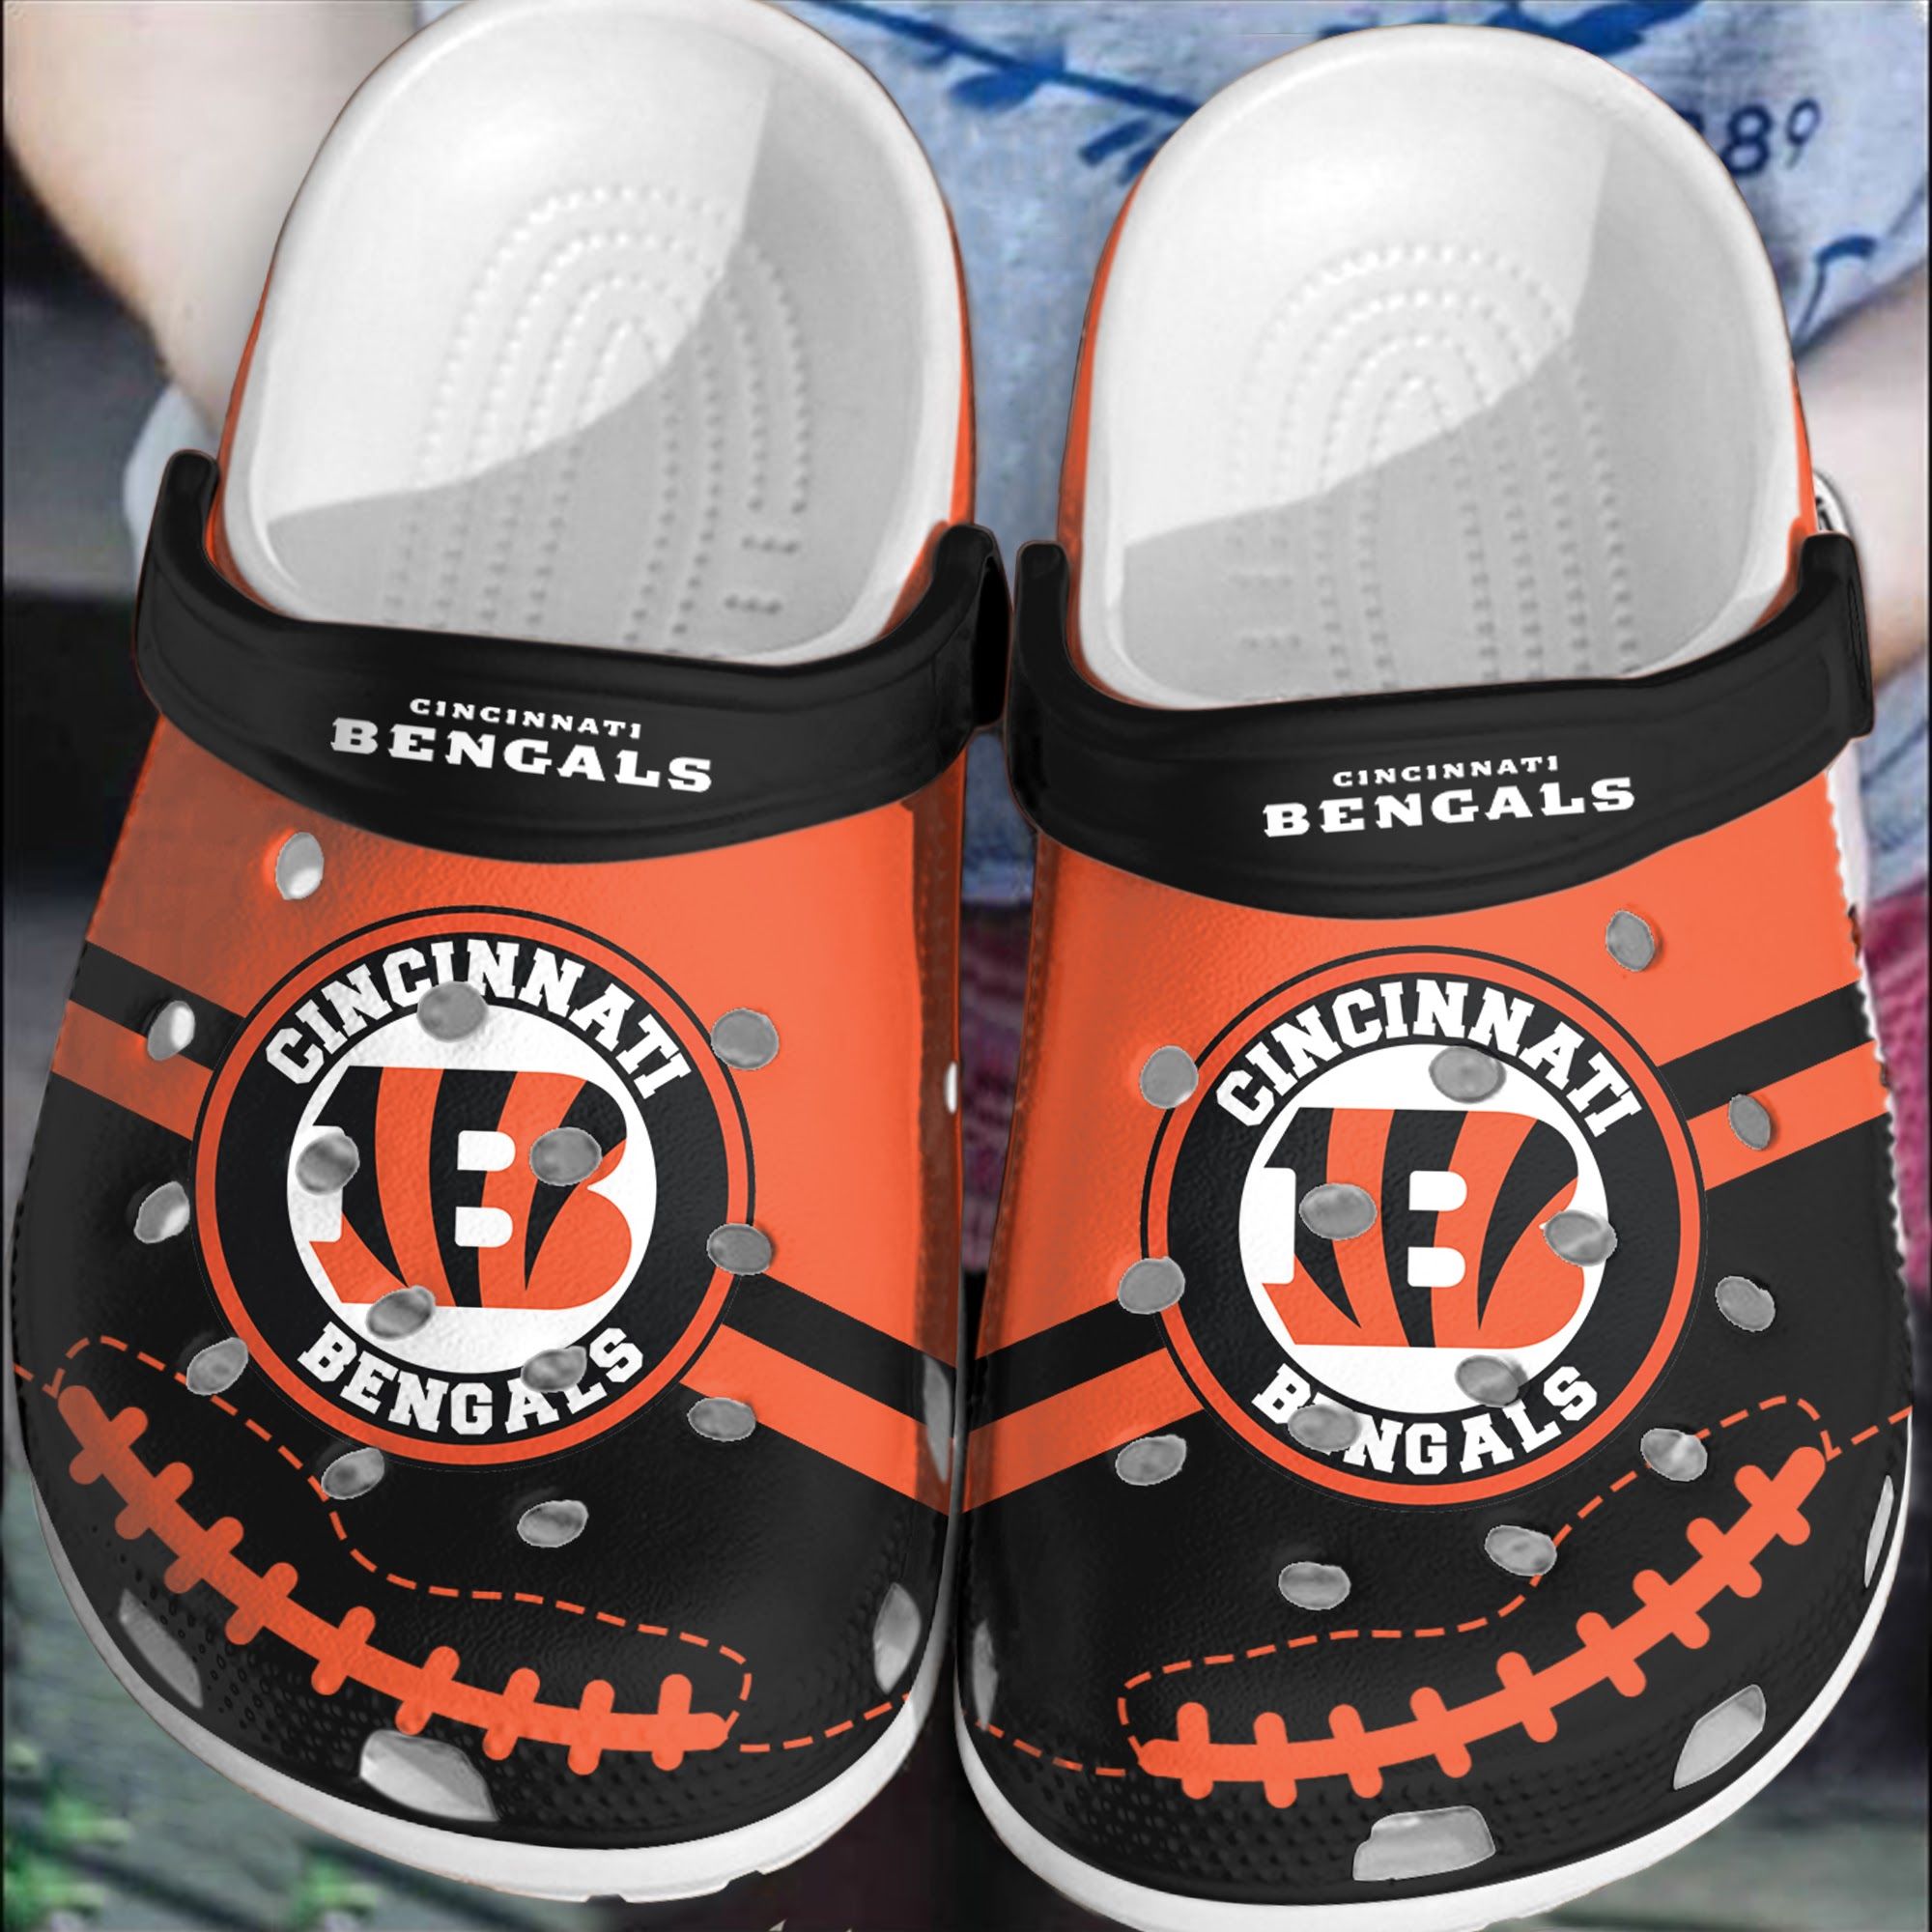 If you'd like to purchase a pair of Crocband Clogs, be sure to check out the official website. 52